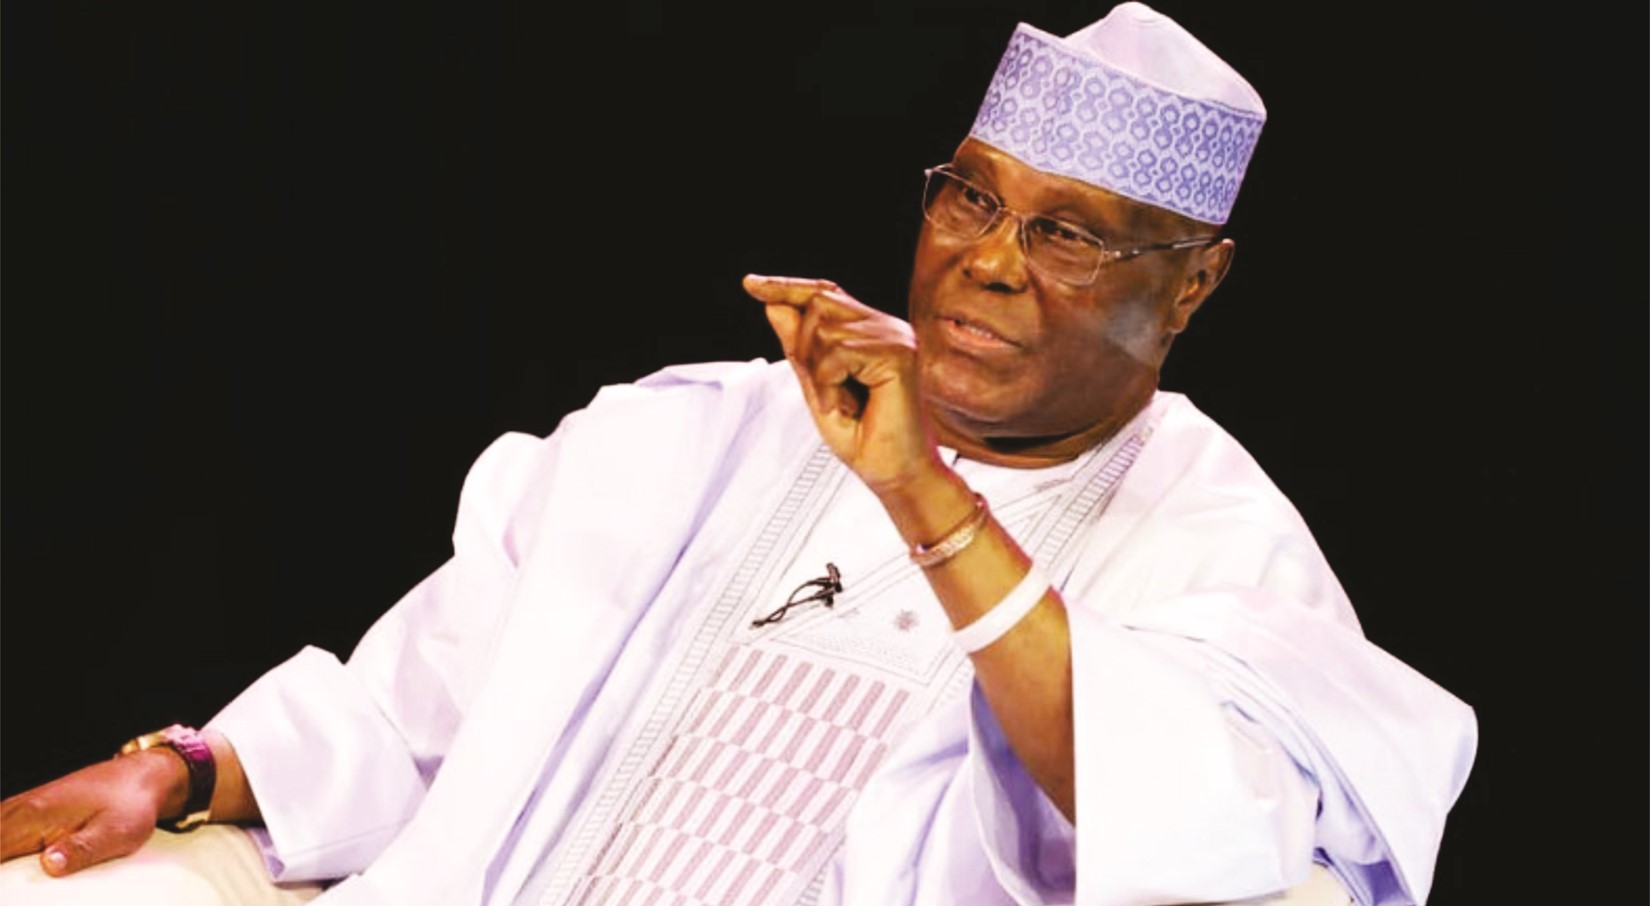 Insecurity: Call former soliders wen ready to fight-Atiku